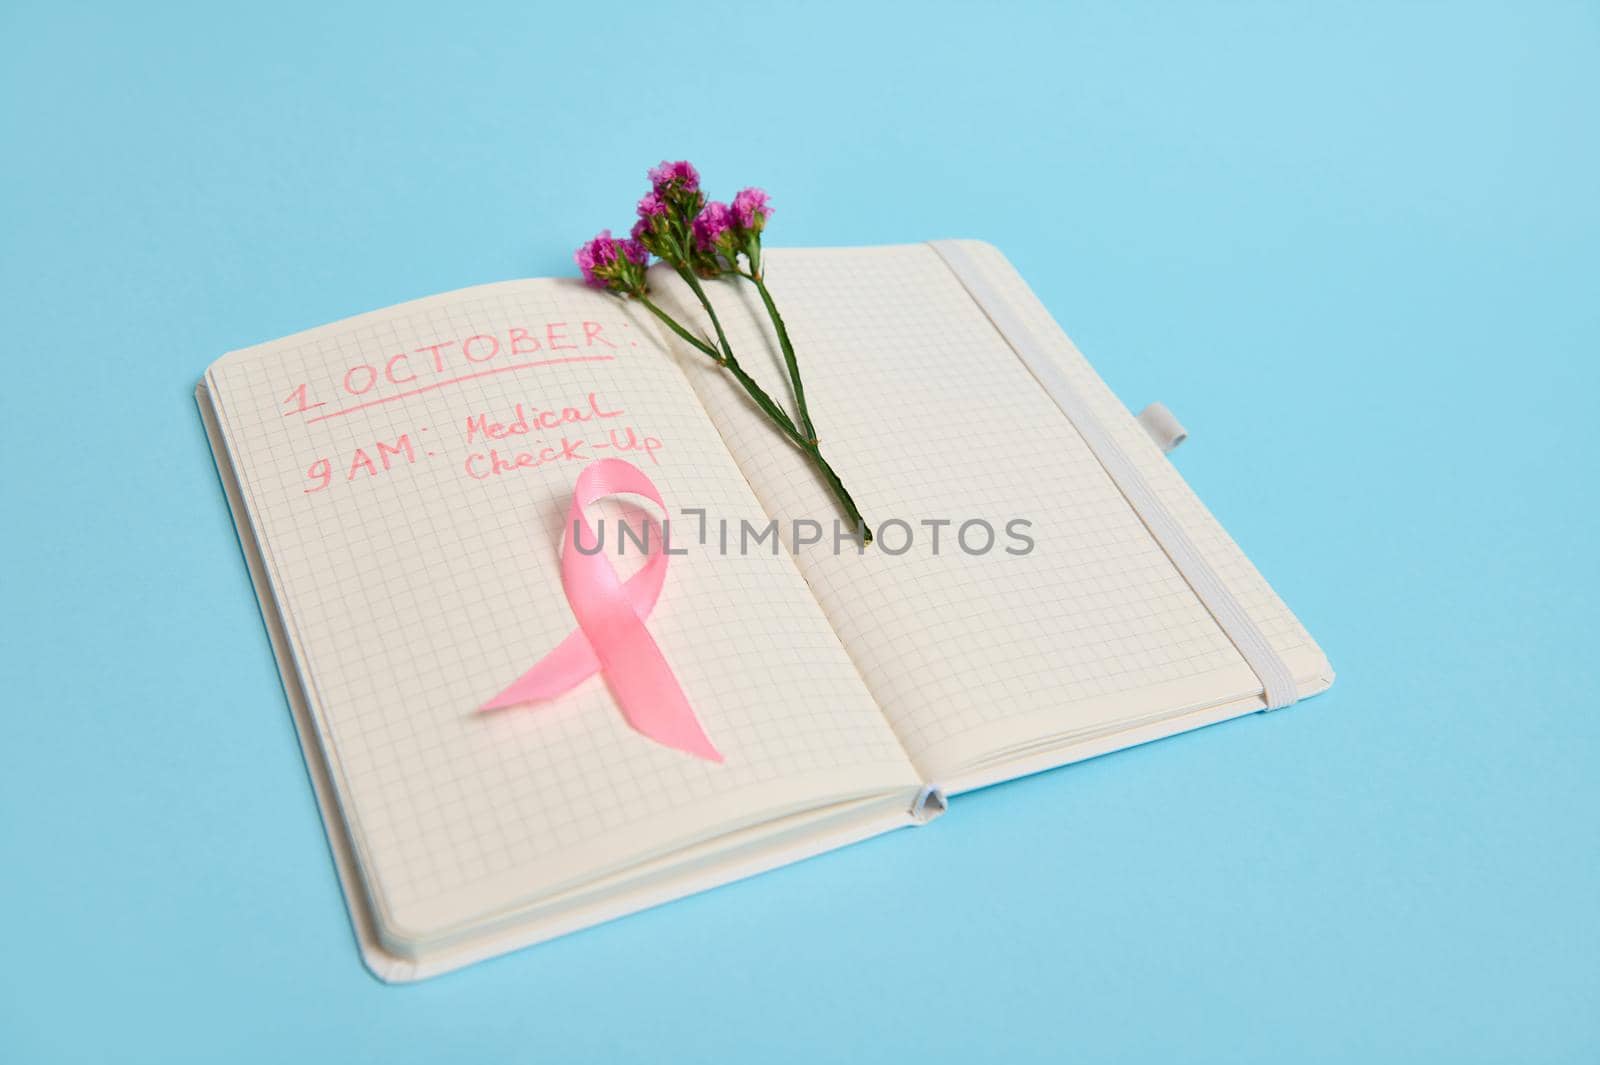 Flowers and pink ribbon, symbol of Breast Cancer Awareness Day, lying on a page with a line of notepad with inscriptions reminding of a medical check-up . October 1st, International Breast Cancer Day